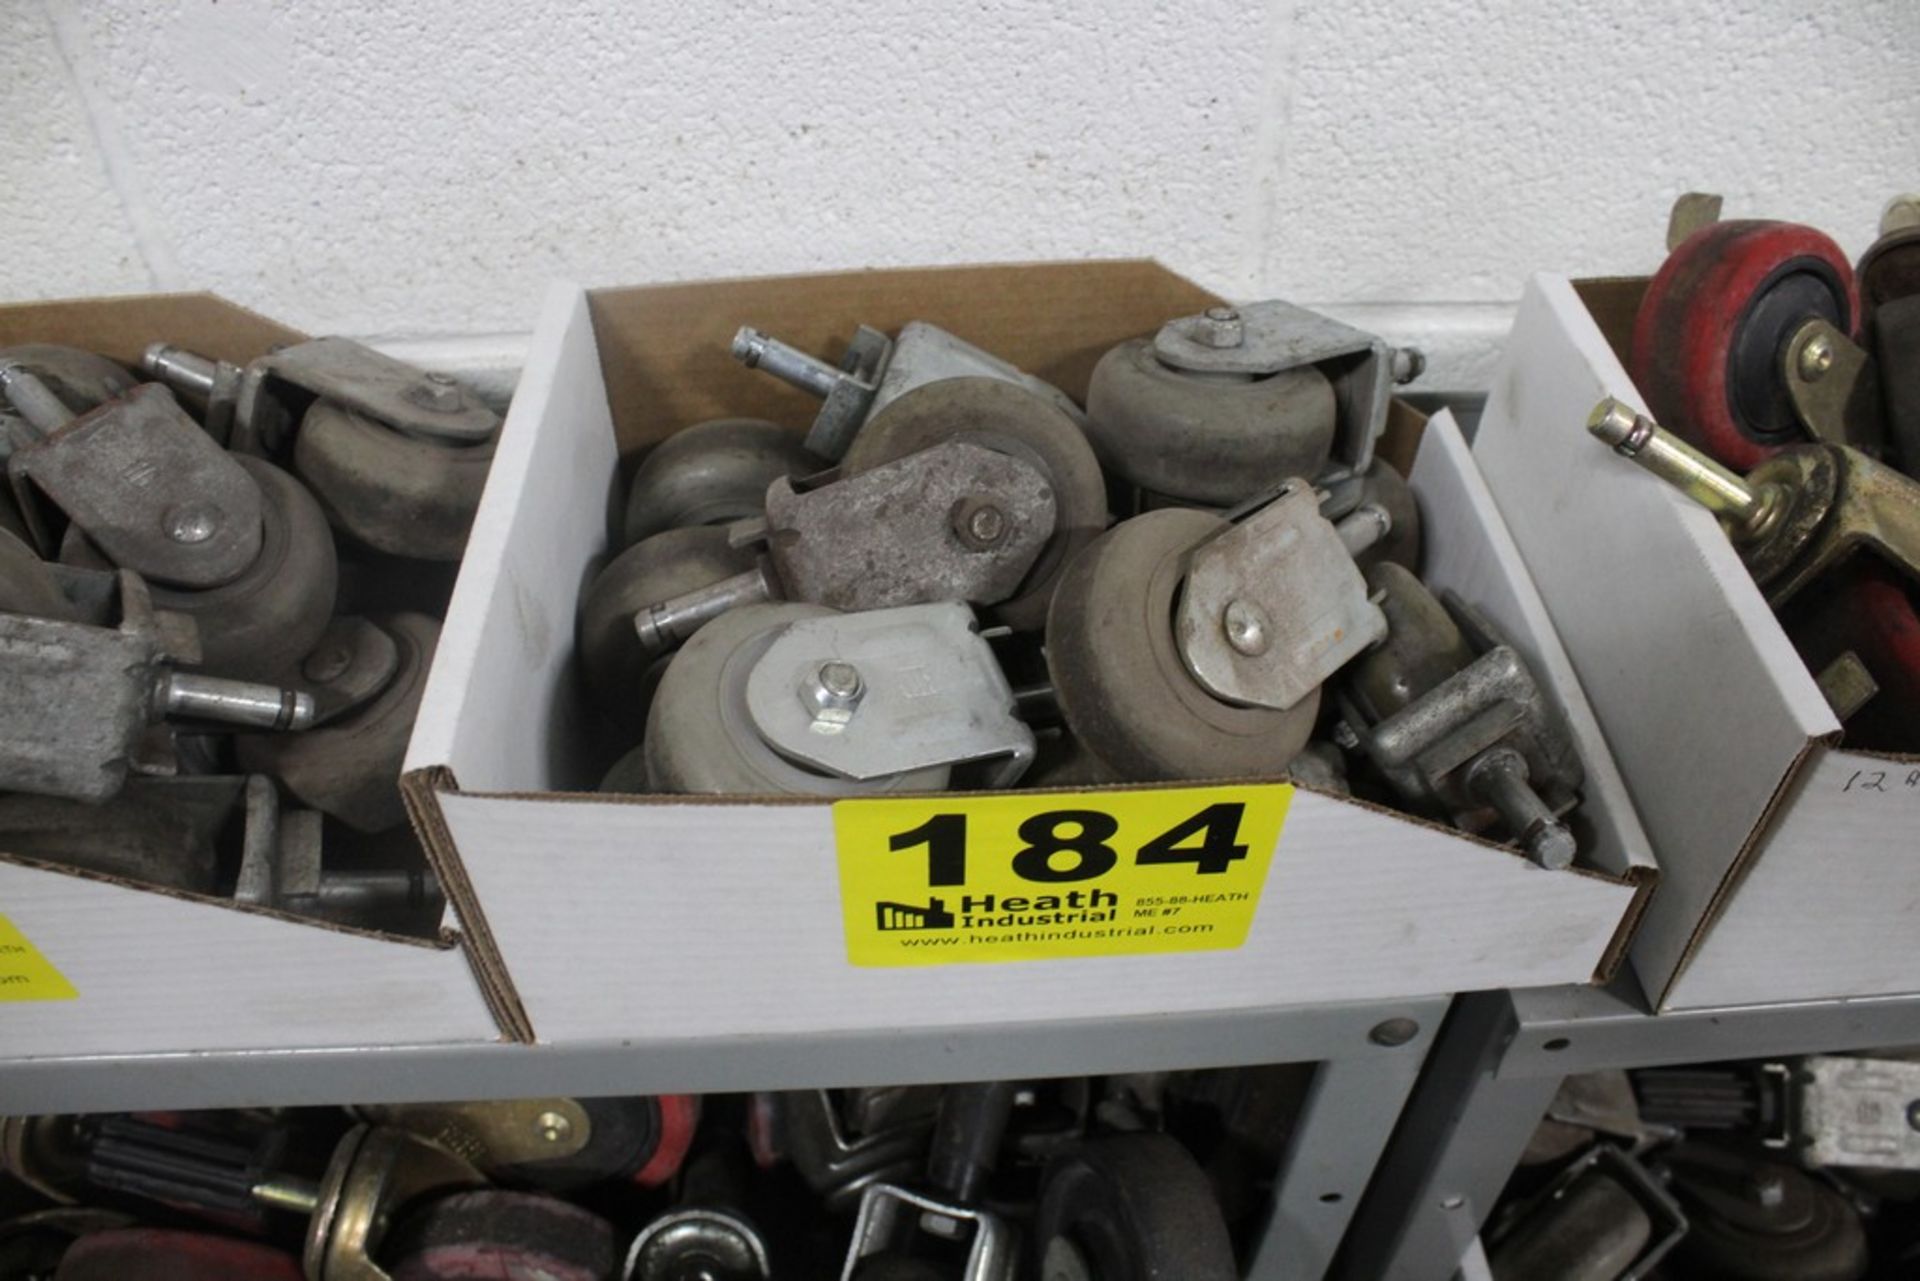 (12) FIXED 3" CASTER WHEELS IN BOX